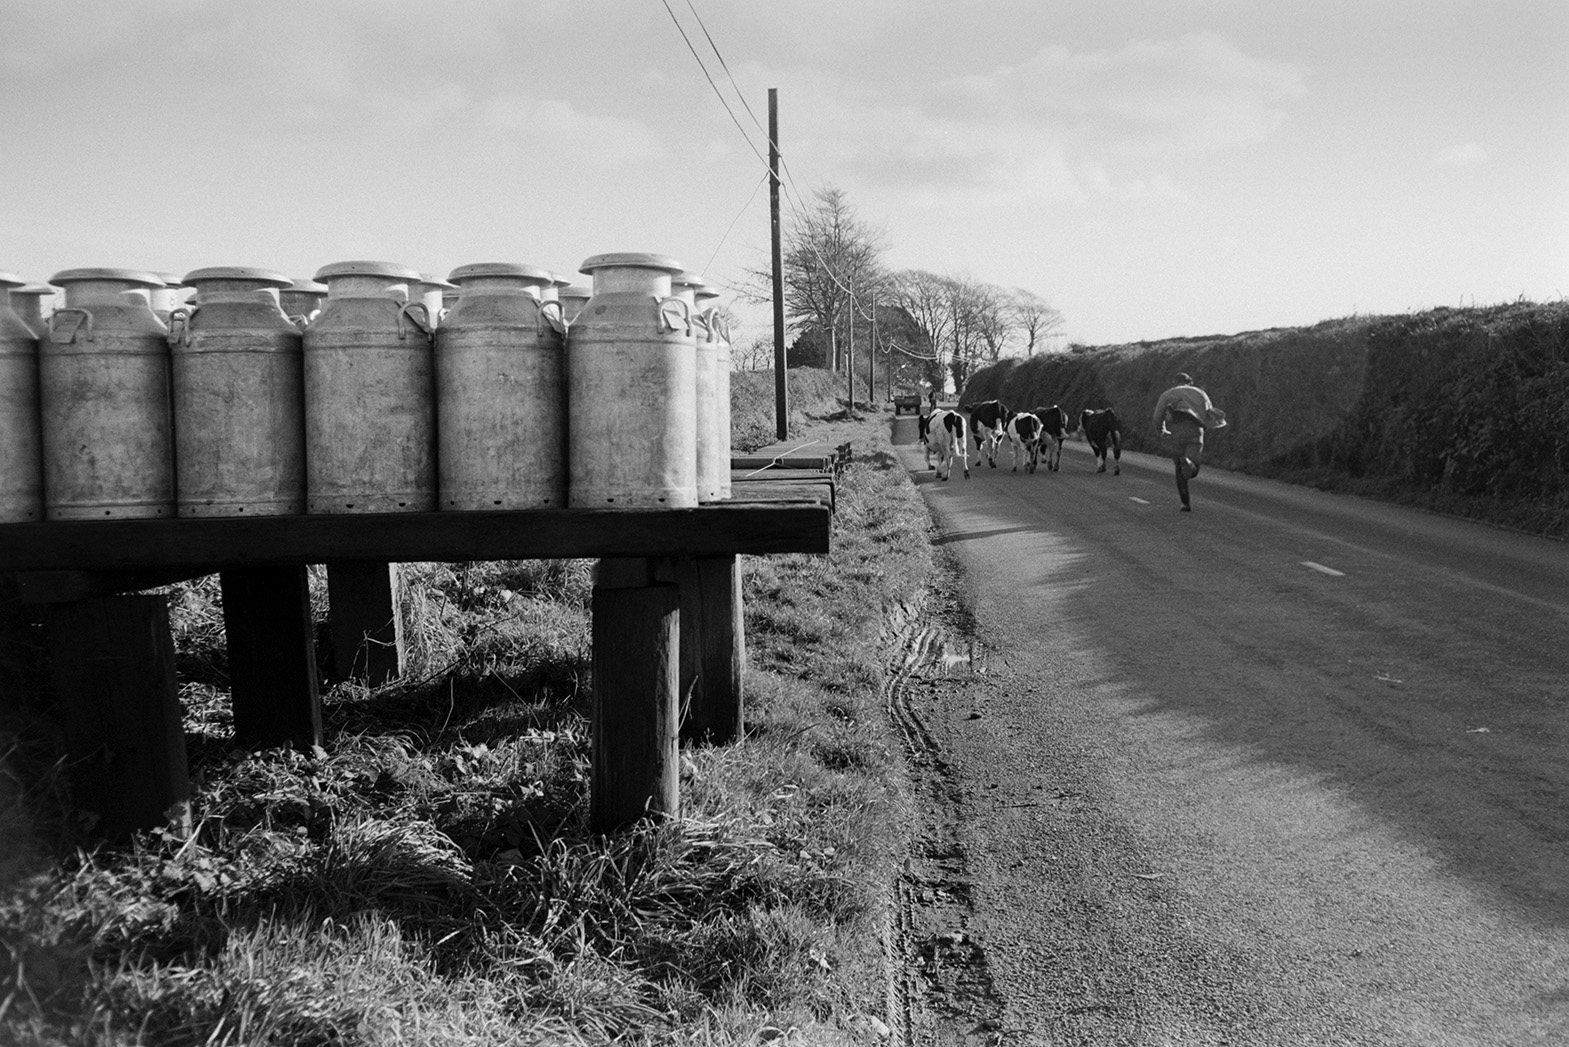 Bullocks being herded by Ivor Bourne down a road in Beaford, past milk churns on a wooden milk churn stand. They are going to their winter quarters.